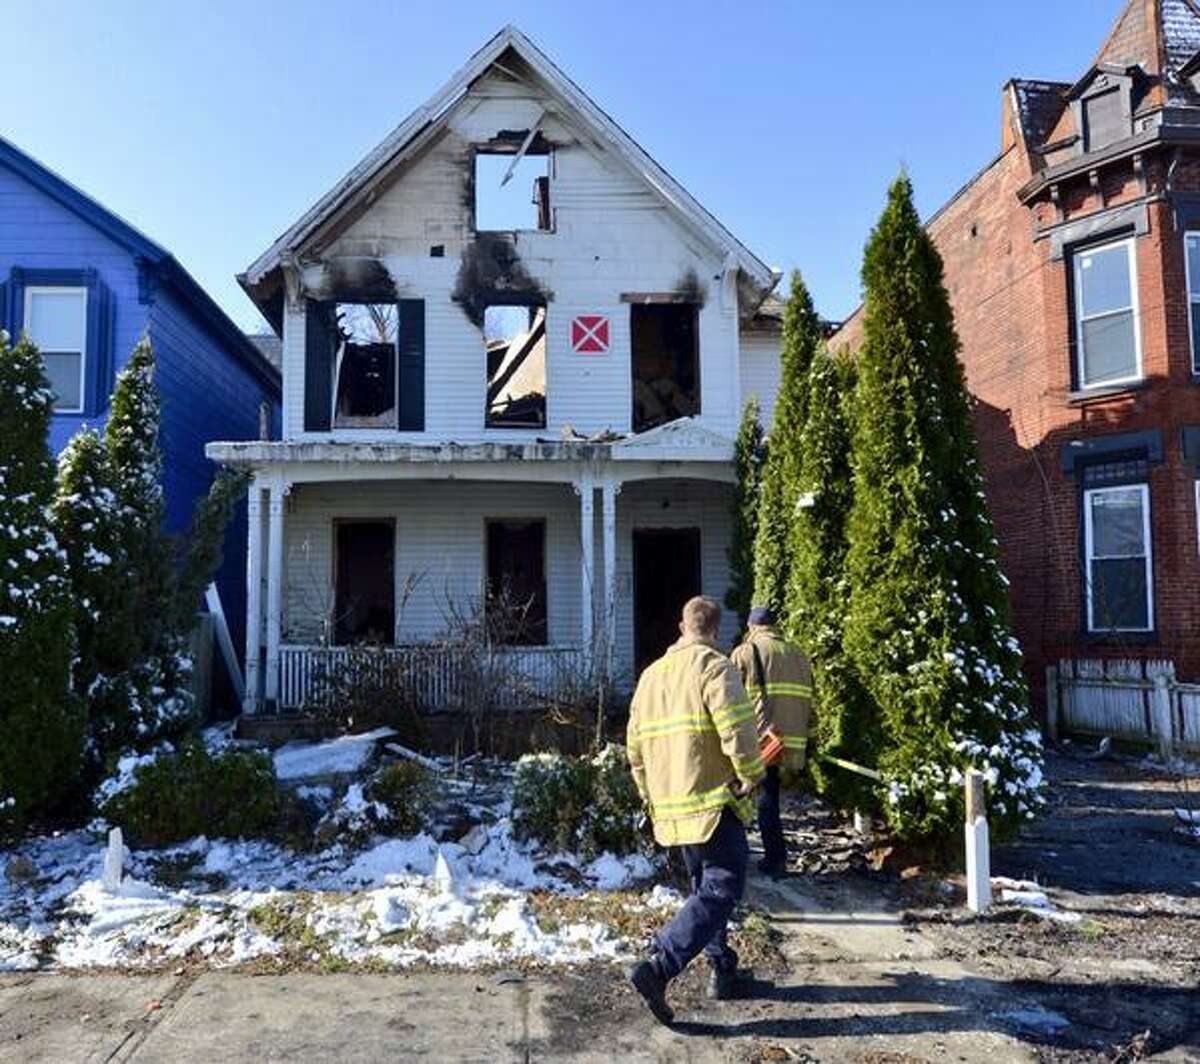 Troy firefighters remained at the scene of an overnight fire that gutted a home at 44 Glen Ave., Troy, on Wednesday, April 16, 2014. (Skip Dickstein / Times Union)